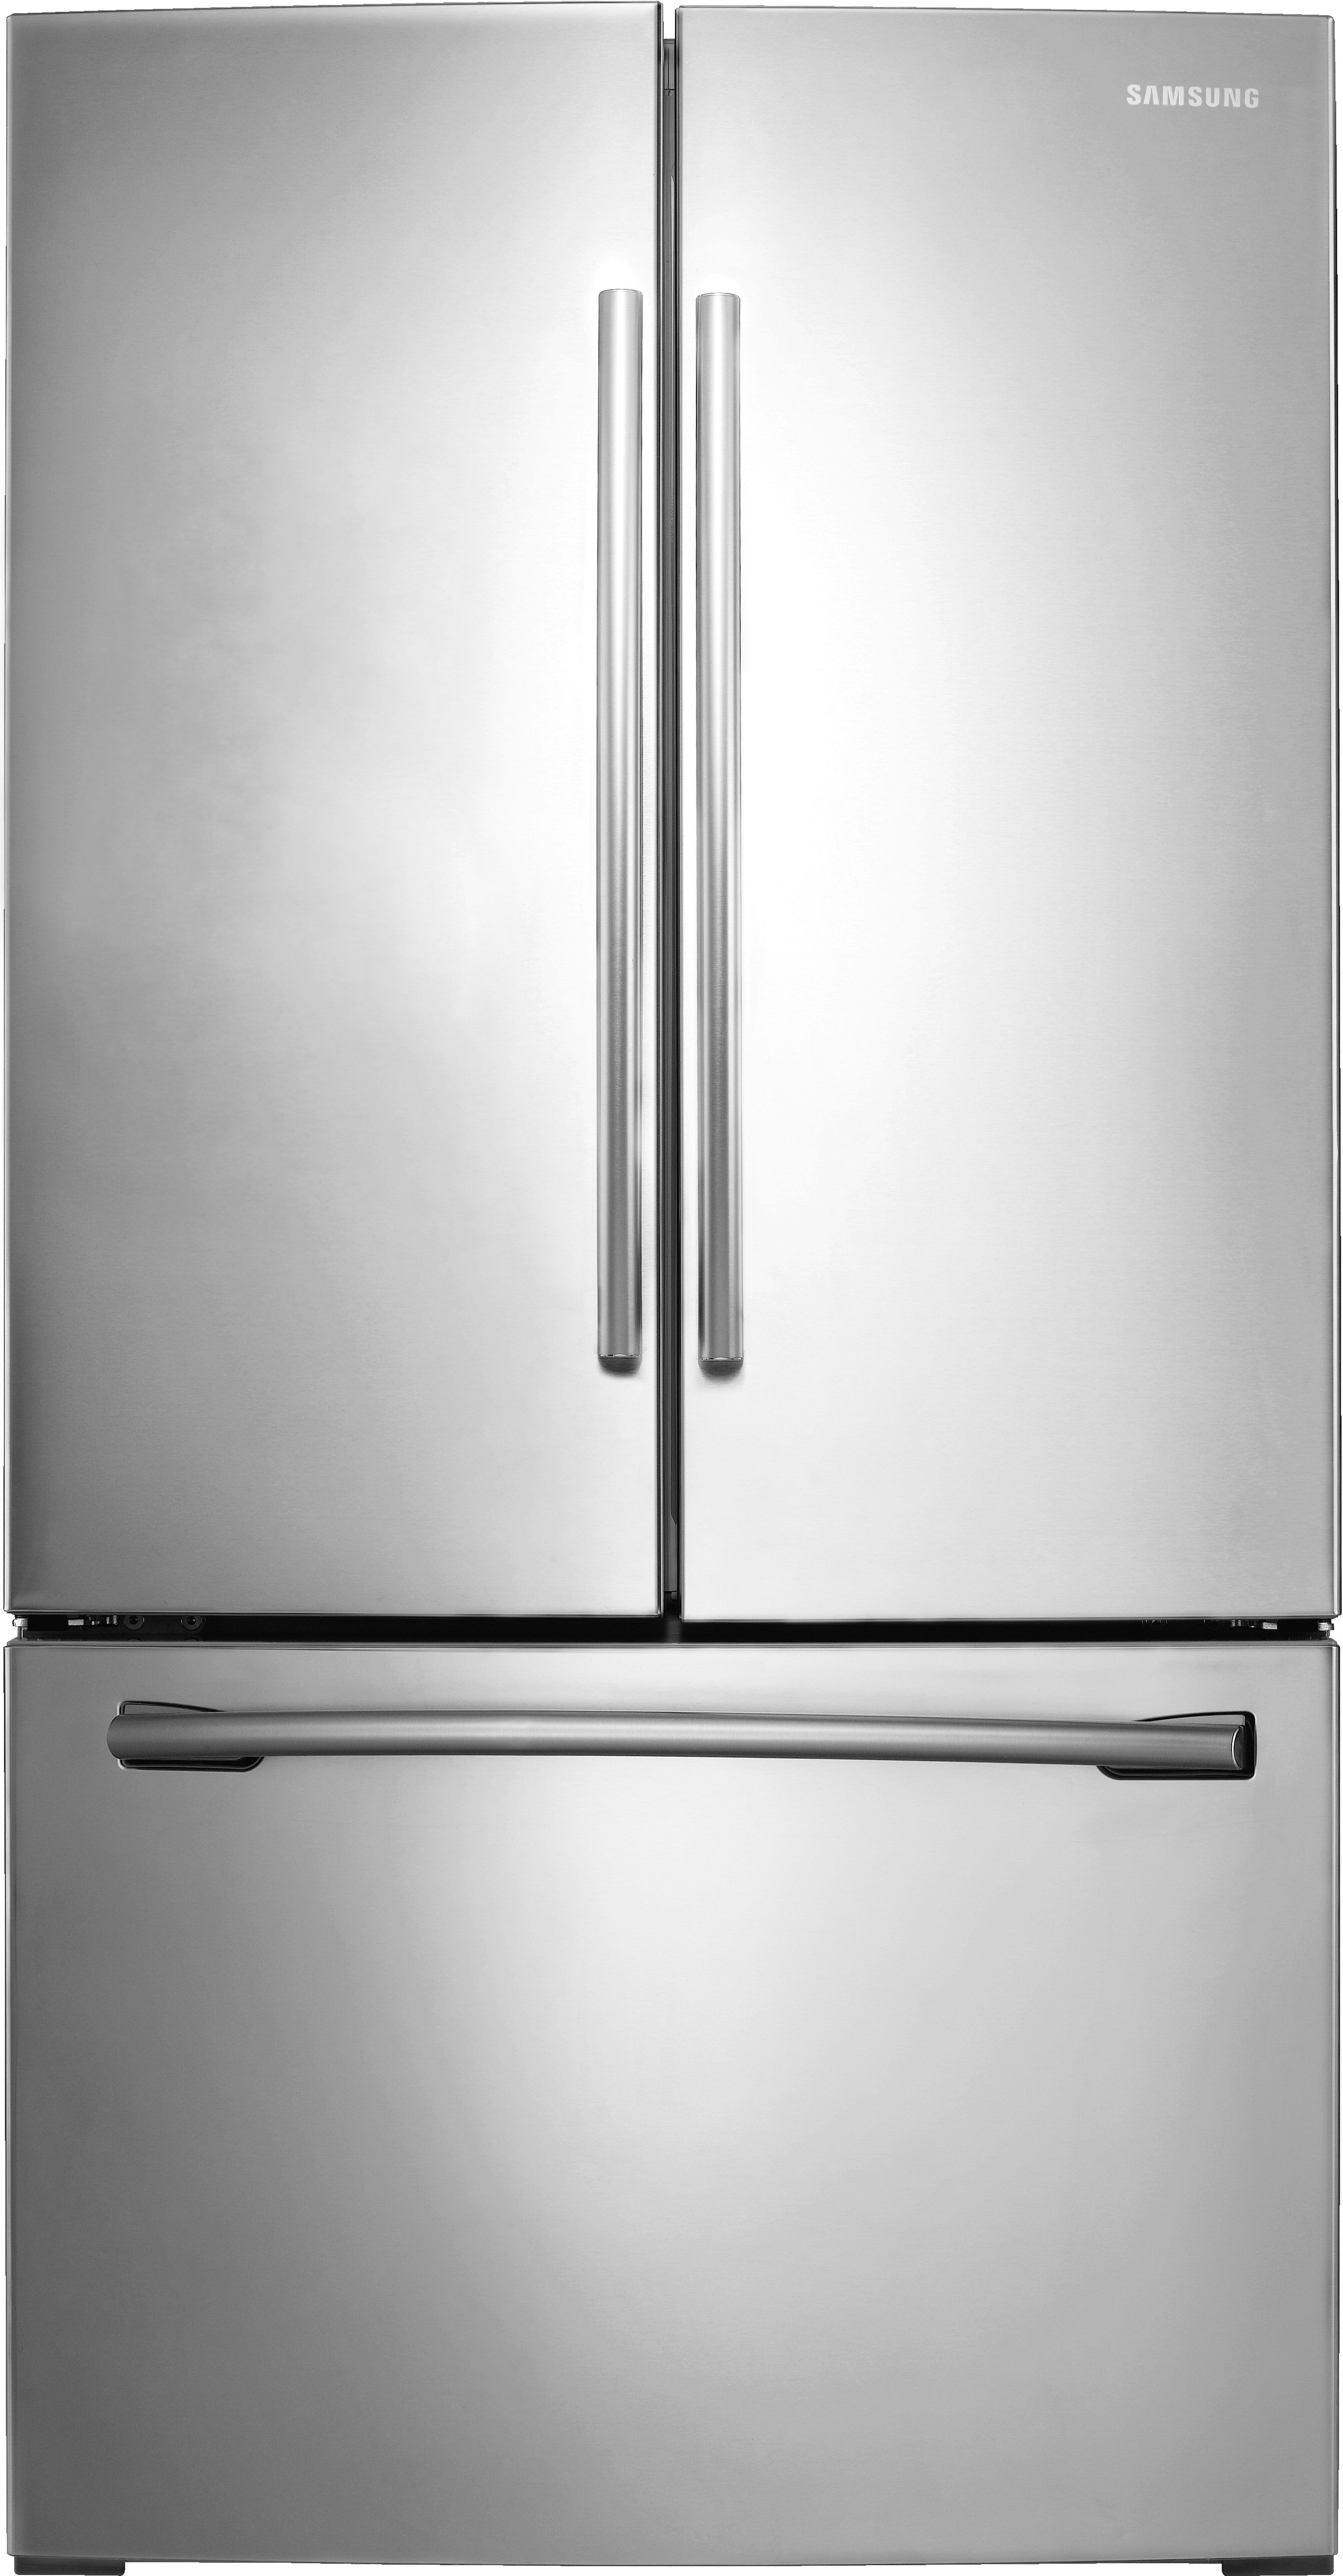 Samsung RF26HFENDSR/AA 26 Cu. Ft. French Door Refrigerator With Twin Cooling Plus - Samsung Parts USA